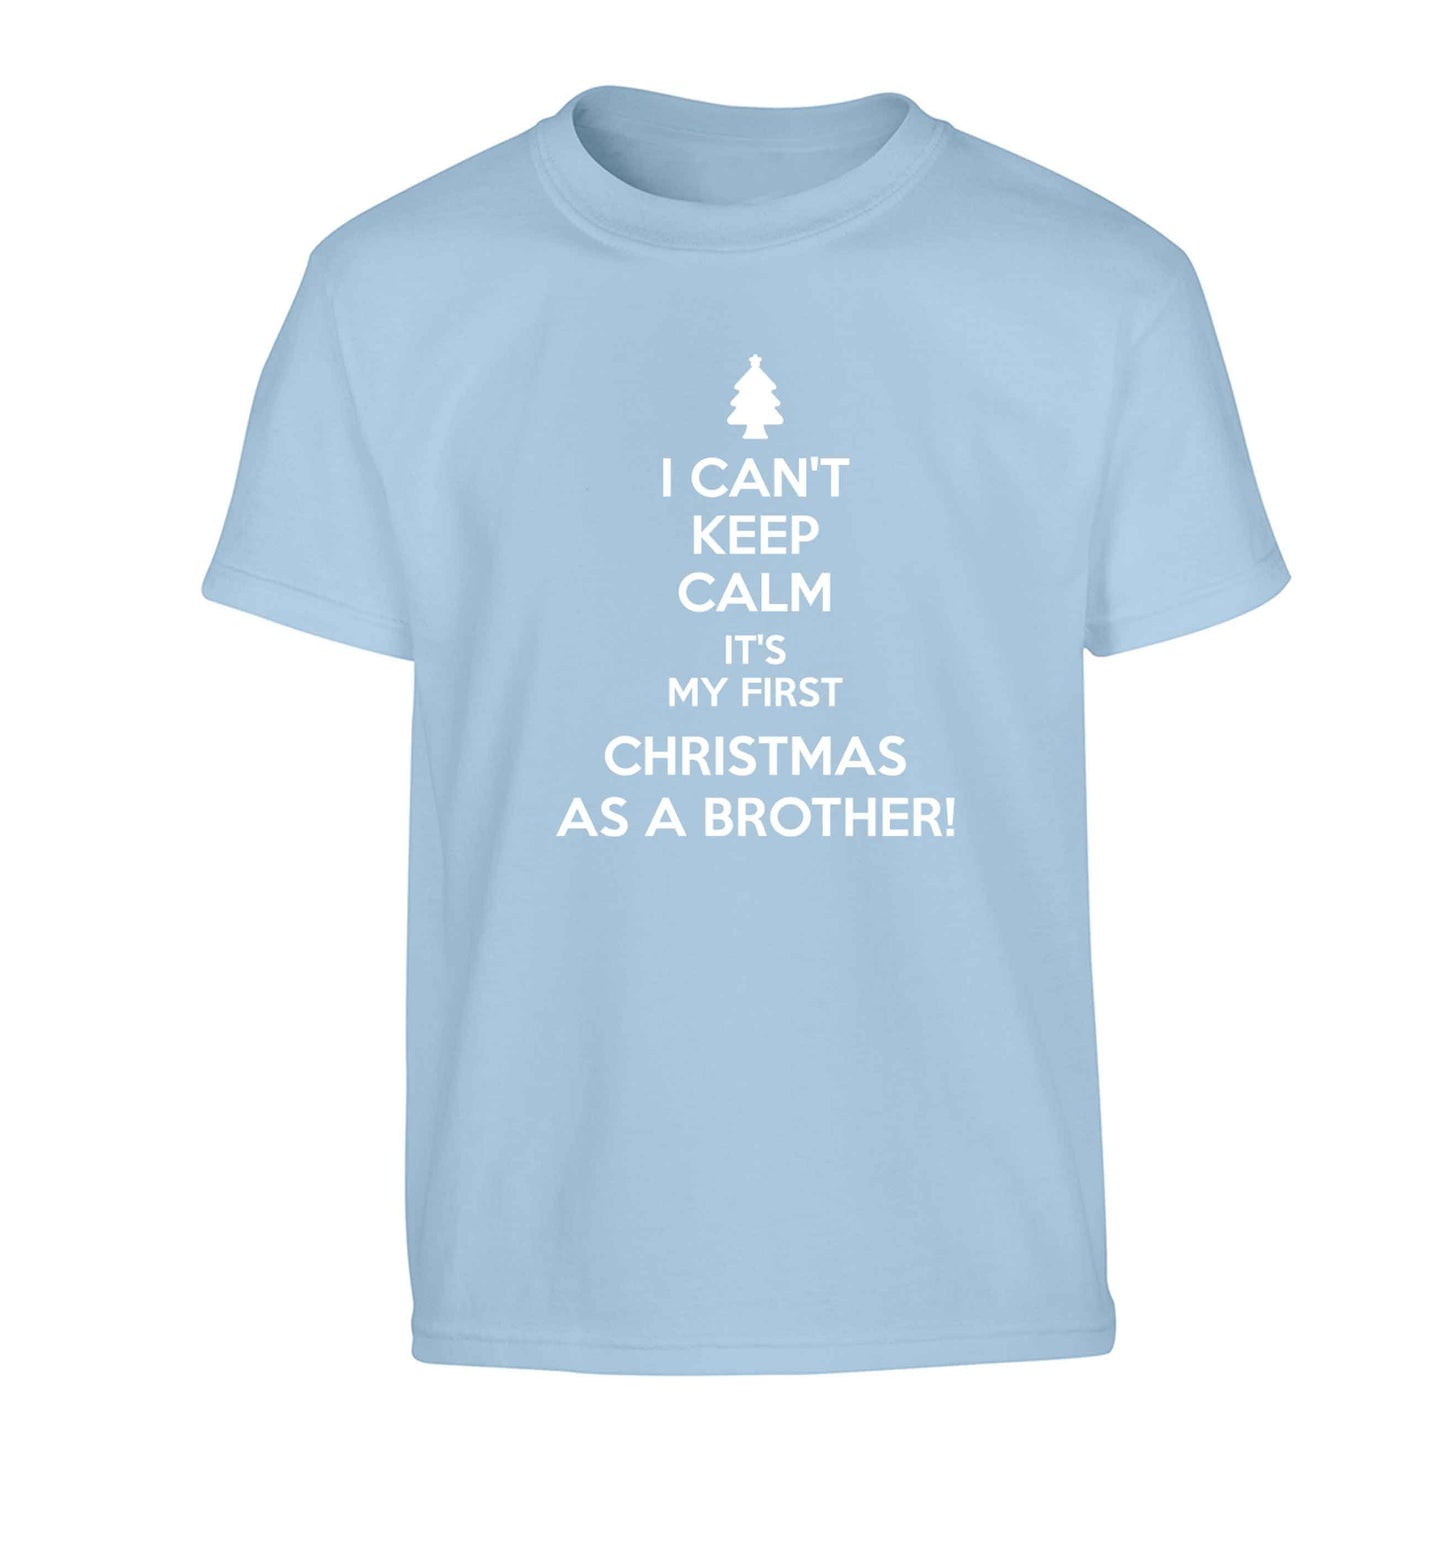 I can't keep calm it's my first Christmas as a brother! Children's light blue Tshirt 12-13 Years